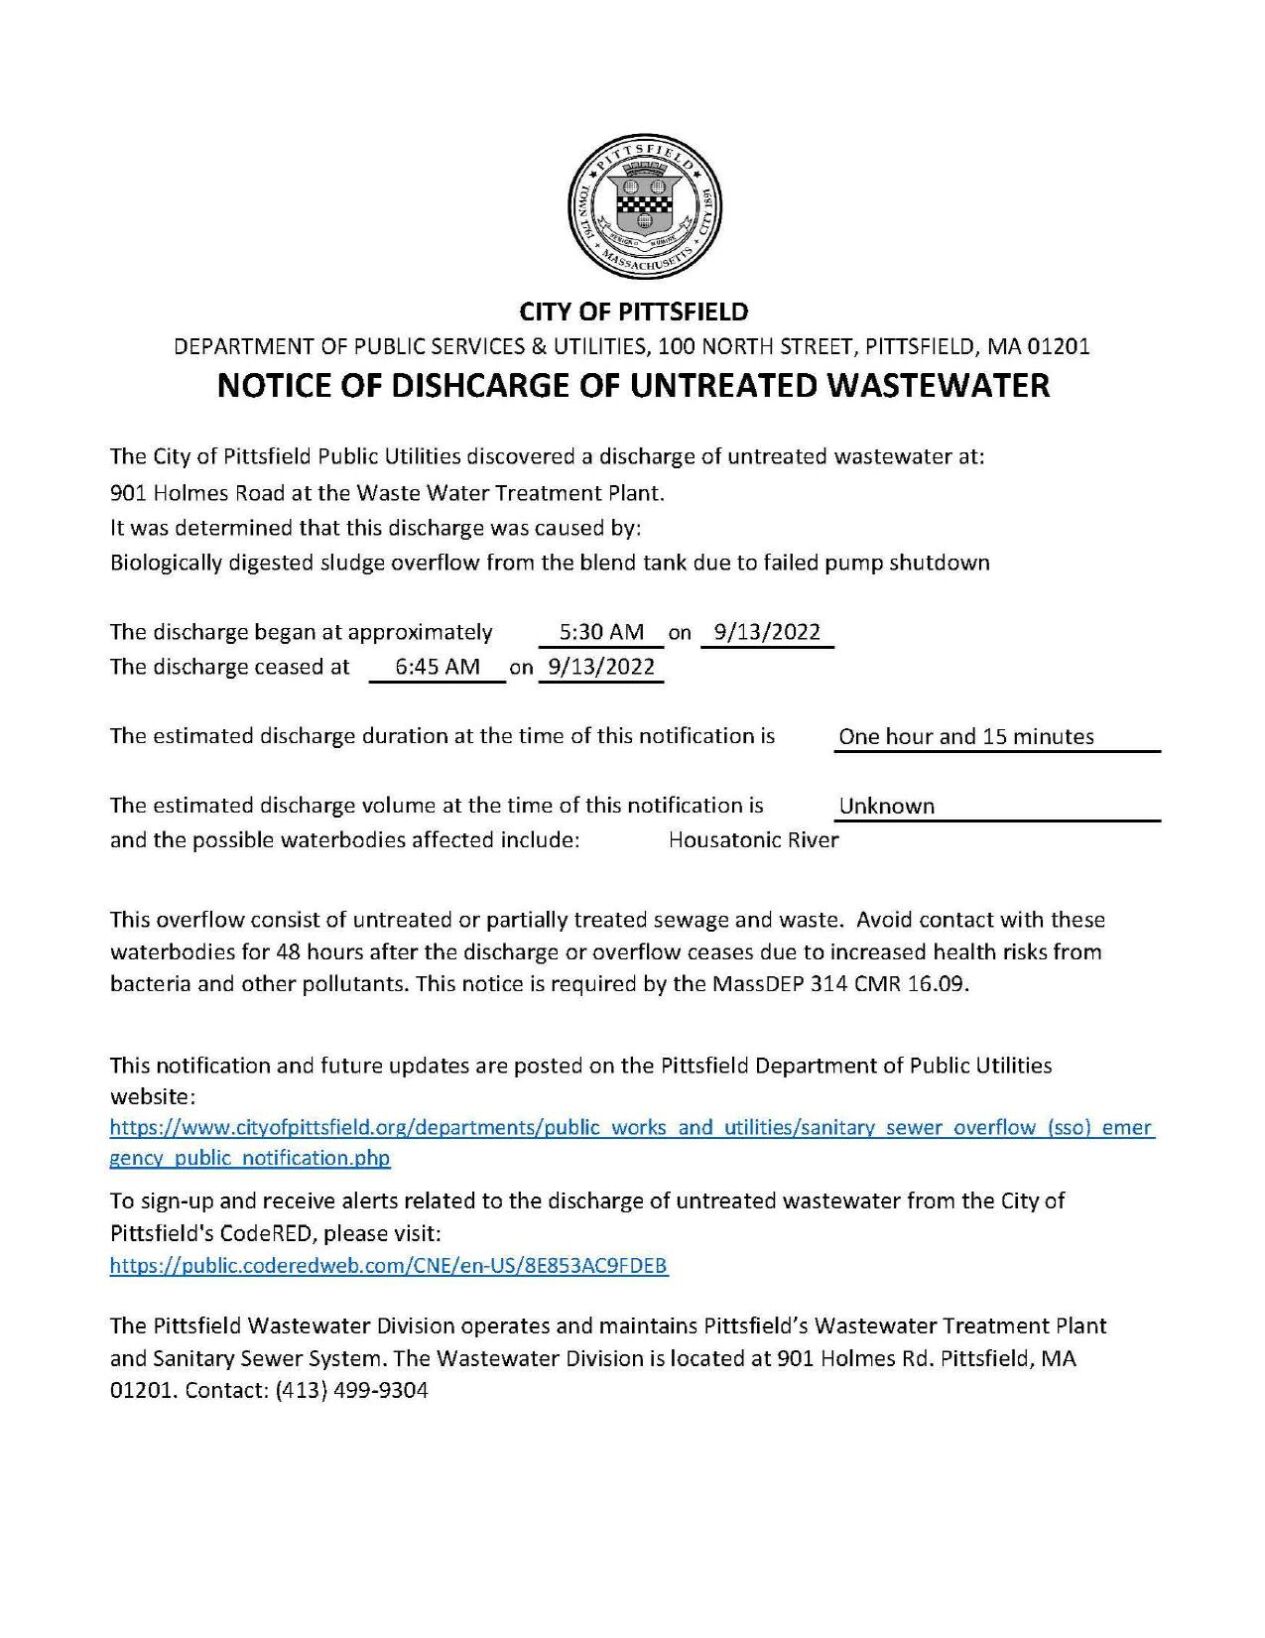 Notice of Discharge of Untreated Wastewater 9:13:22.pdf